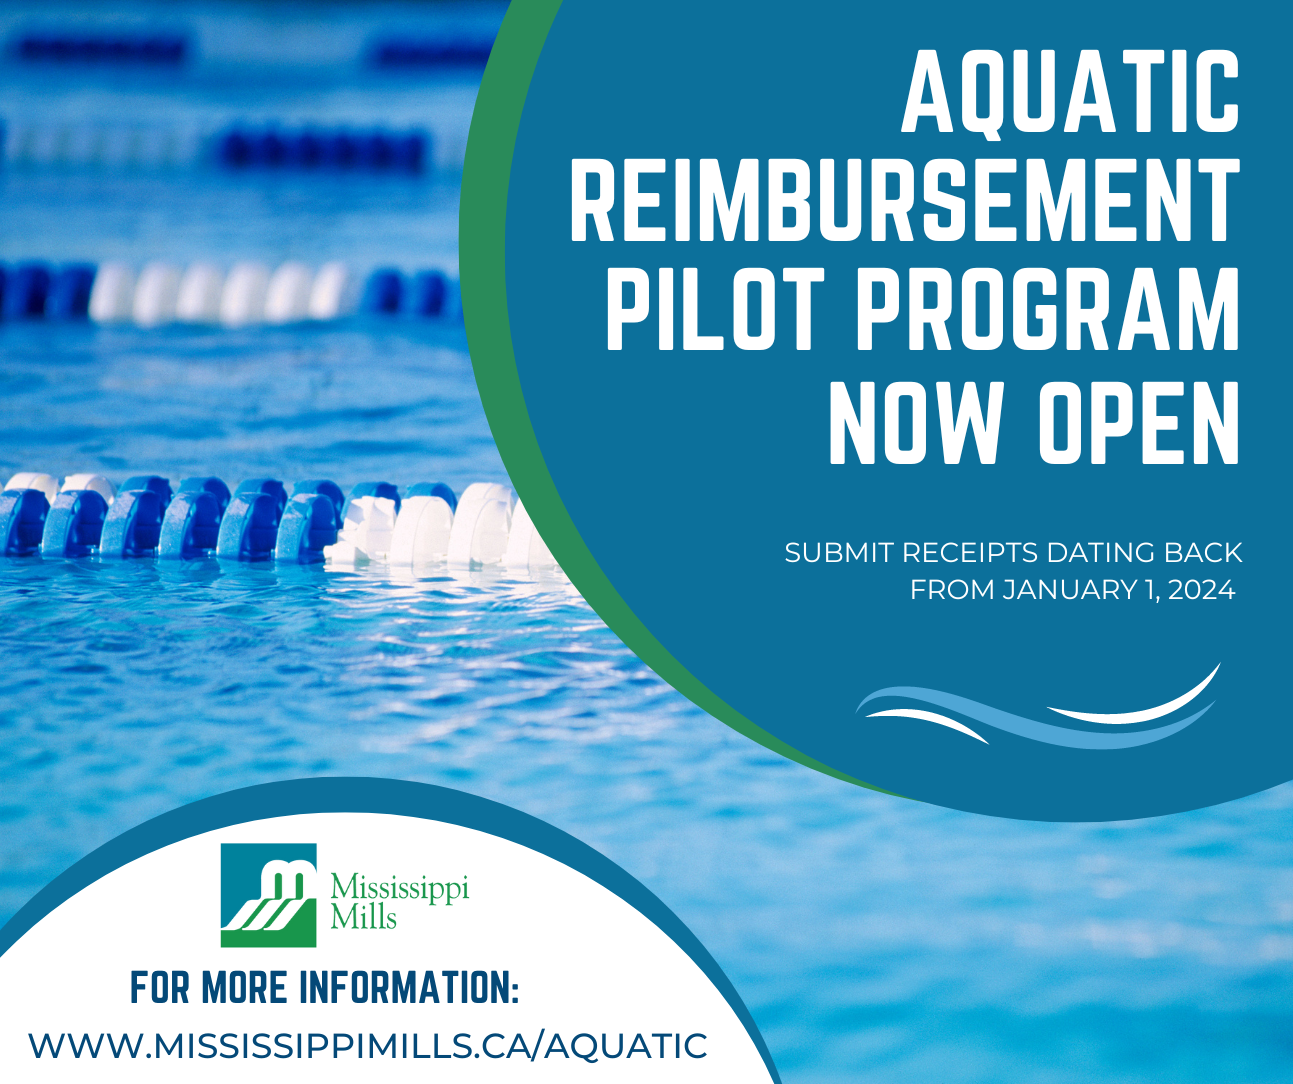 Green, blue and white graphic with photo of swimming pool and text 'Aquatic Reimbursement Pilot Program Now Open'